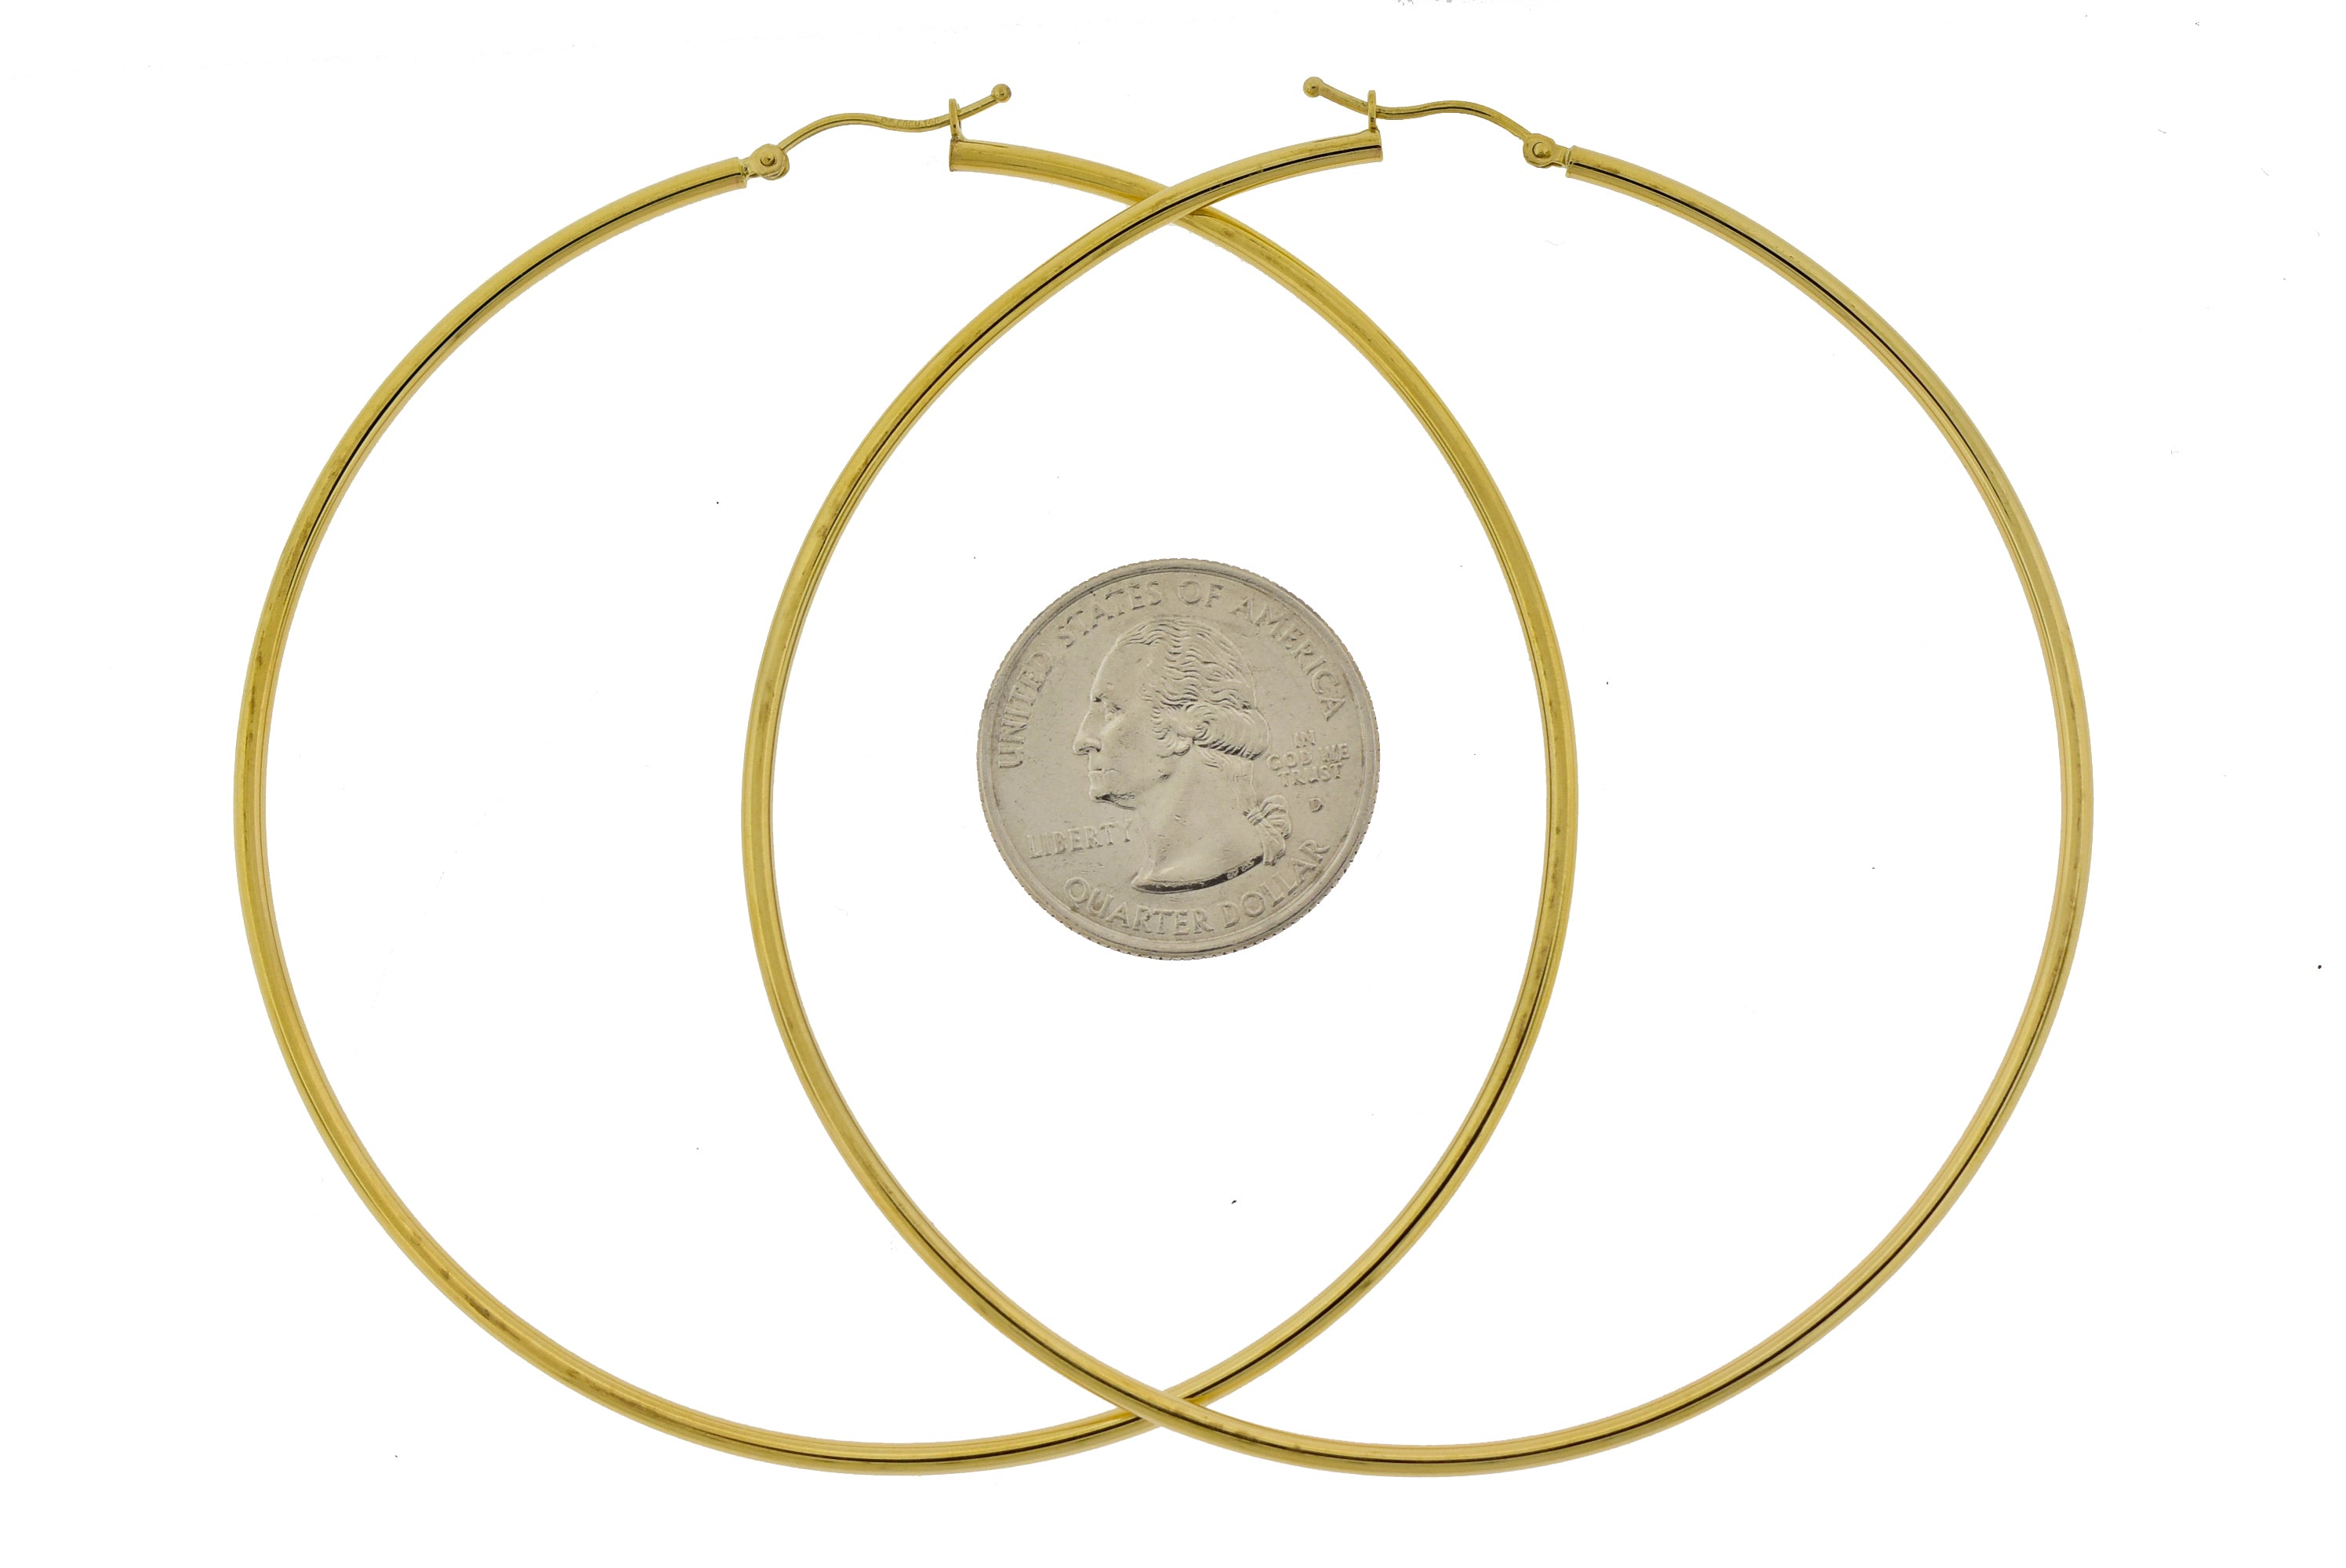 14K Yellow Gold 3.15 inch Diameter Extra Large Giant Gigantic Round Classic Hoop Earrings 80mm x 2mm